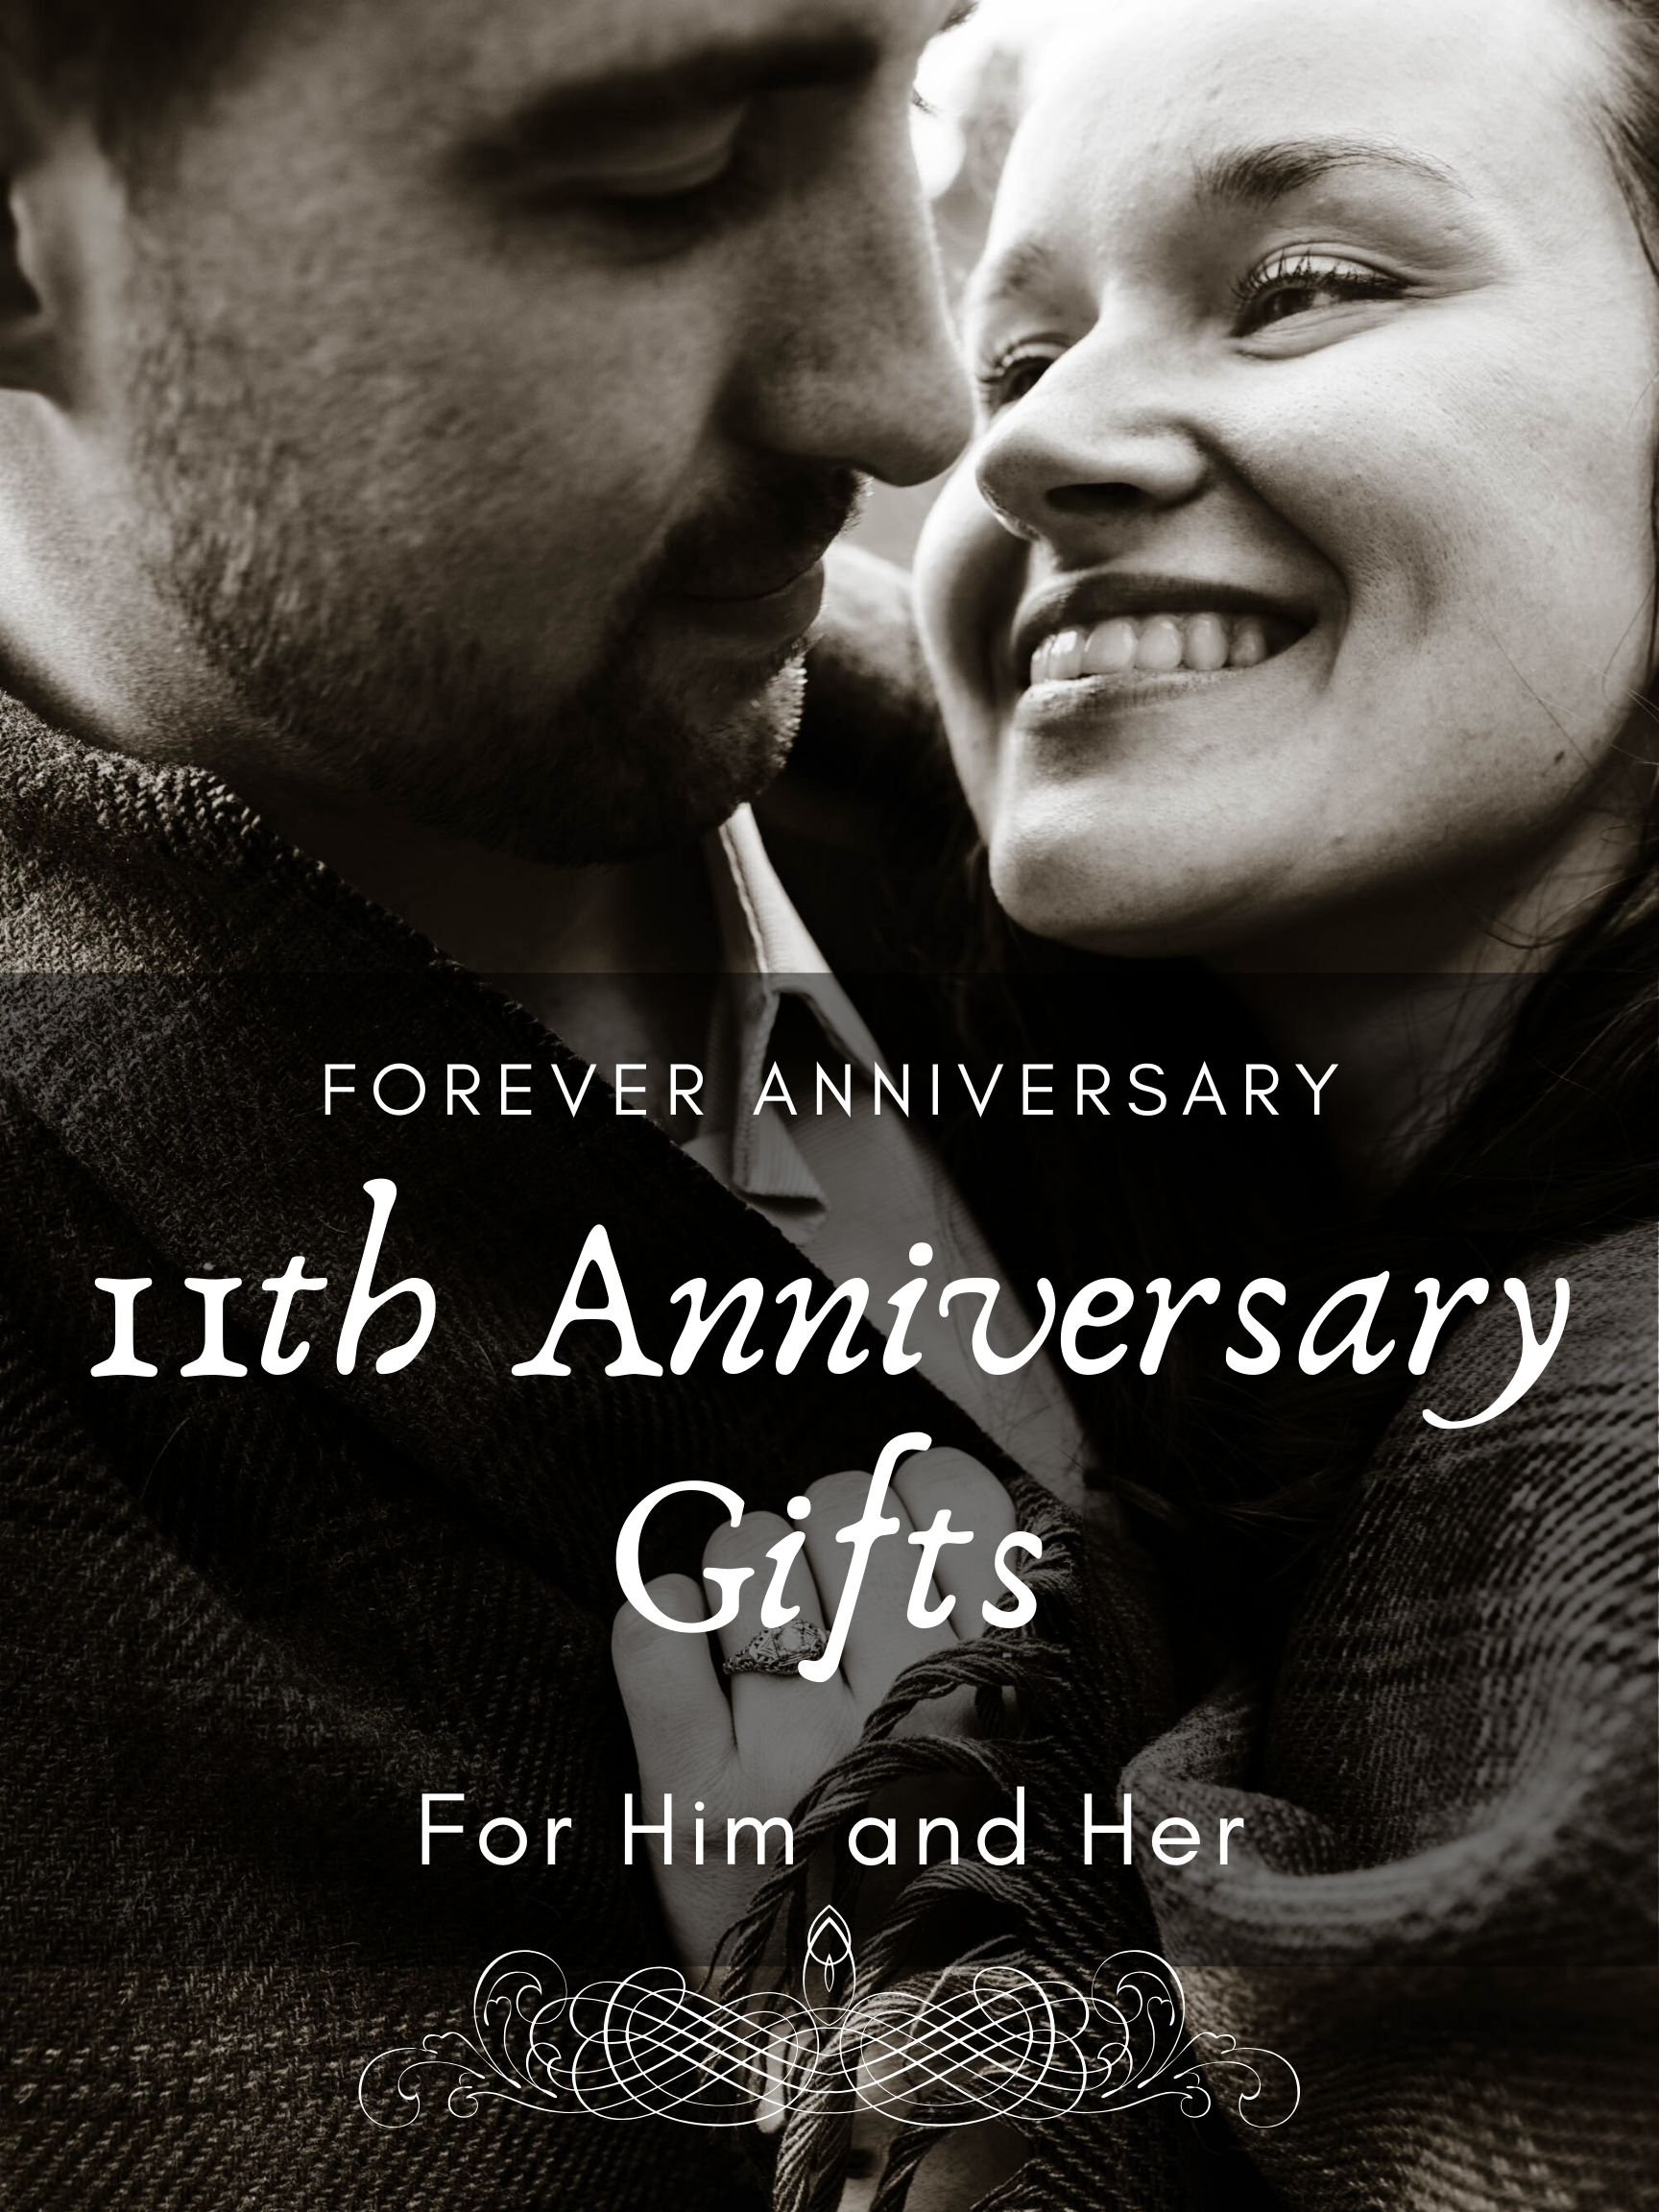 11th Anniversary Gifts for Him and Her – Forever Anniversary